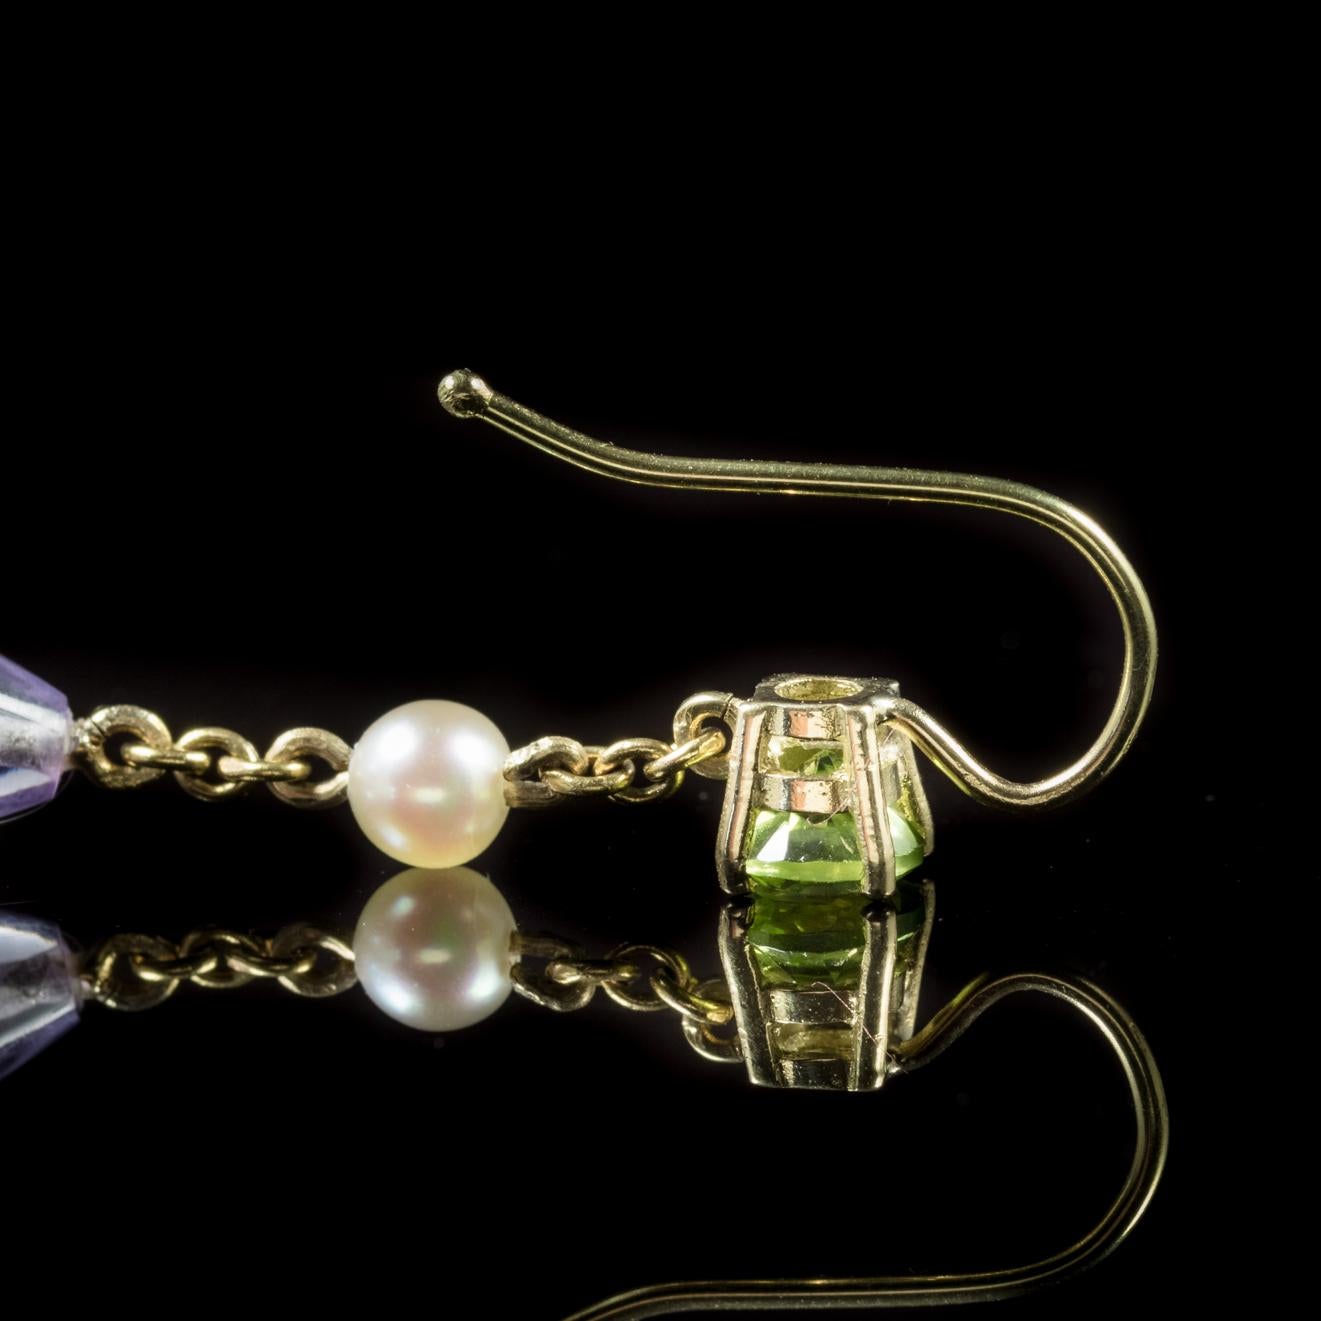 Antique Victorian Amethyst Suffragette Earrings 18 Carat Gold, circa 1900 1